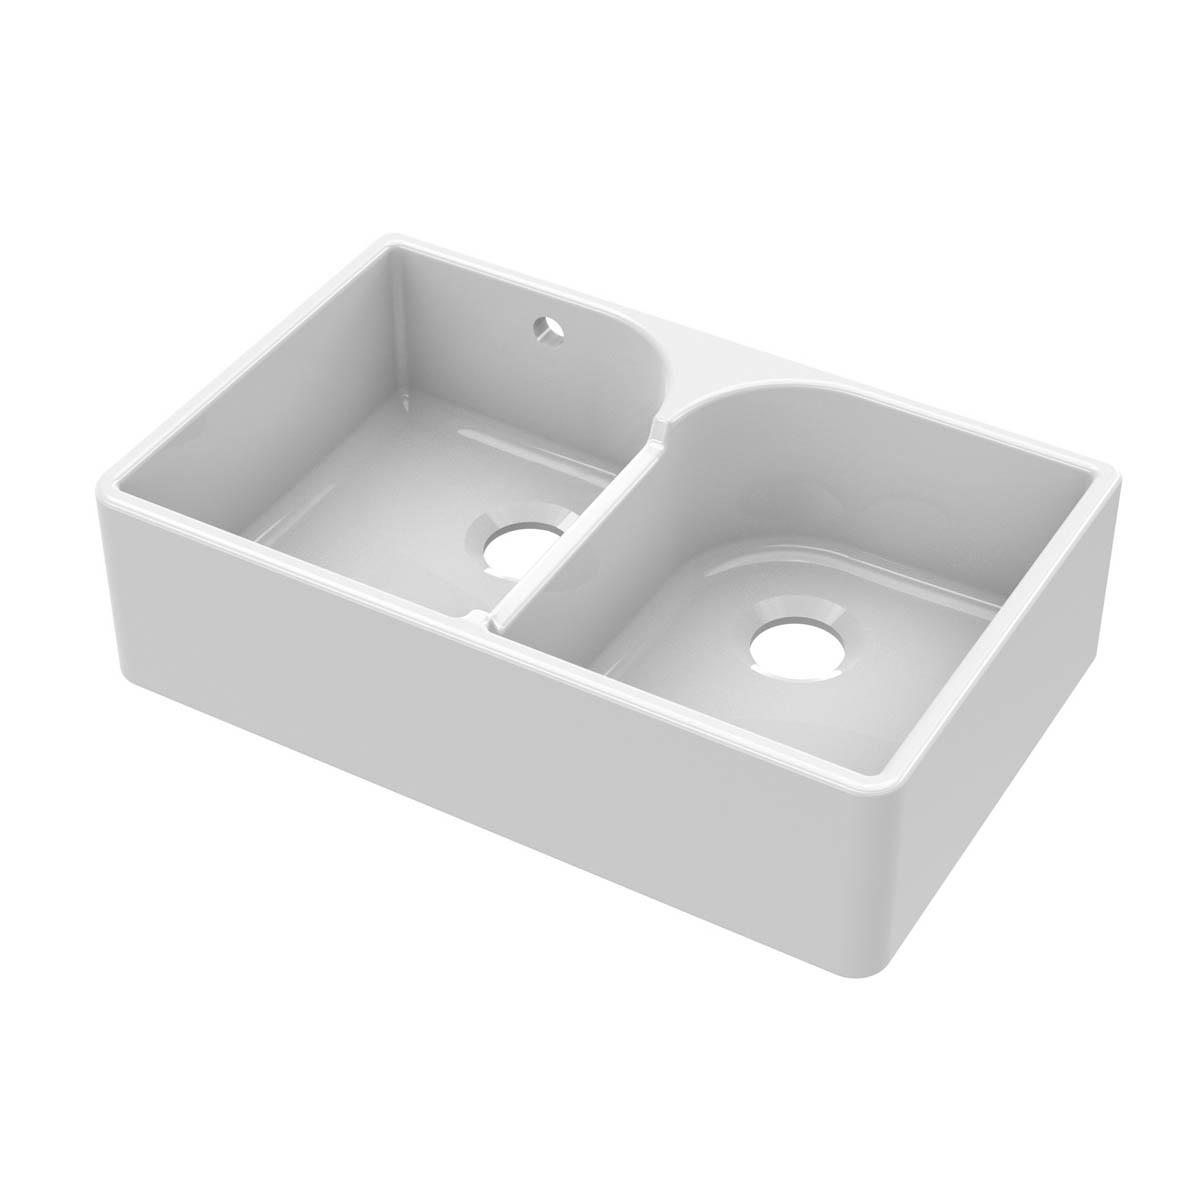 Nuie Butler Double Bowl 795x500x220mm Fireclay Sink with Stepped Weir,Tap Ledge & Overflow - White (20295)